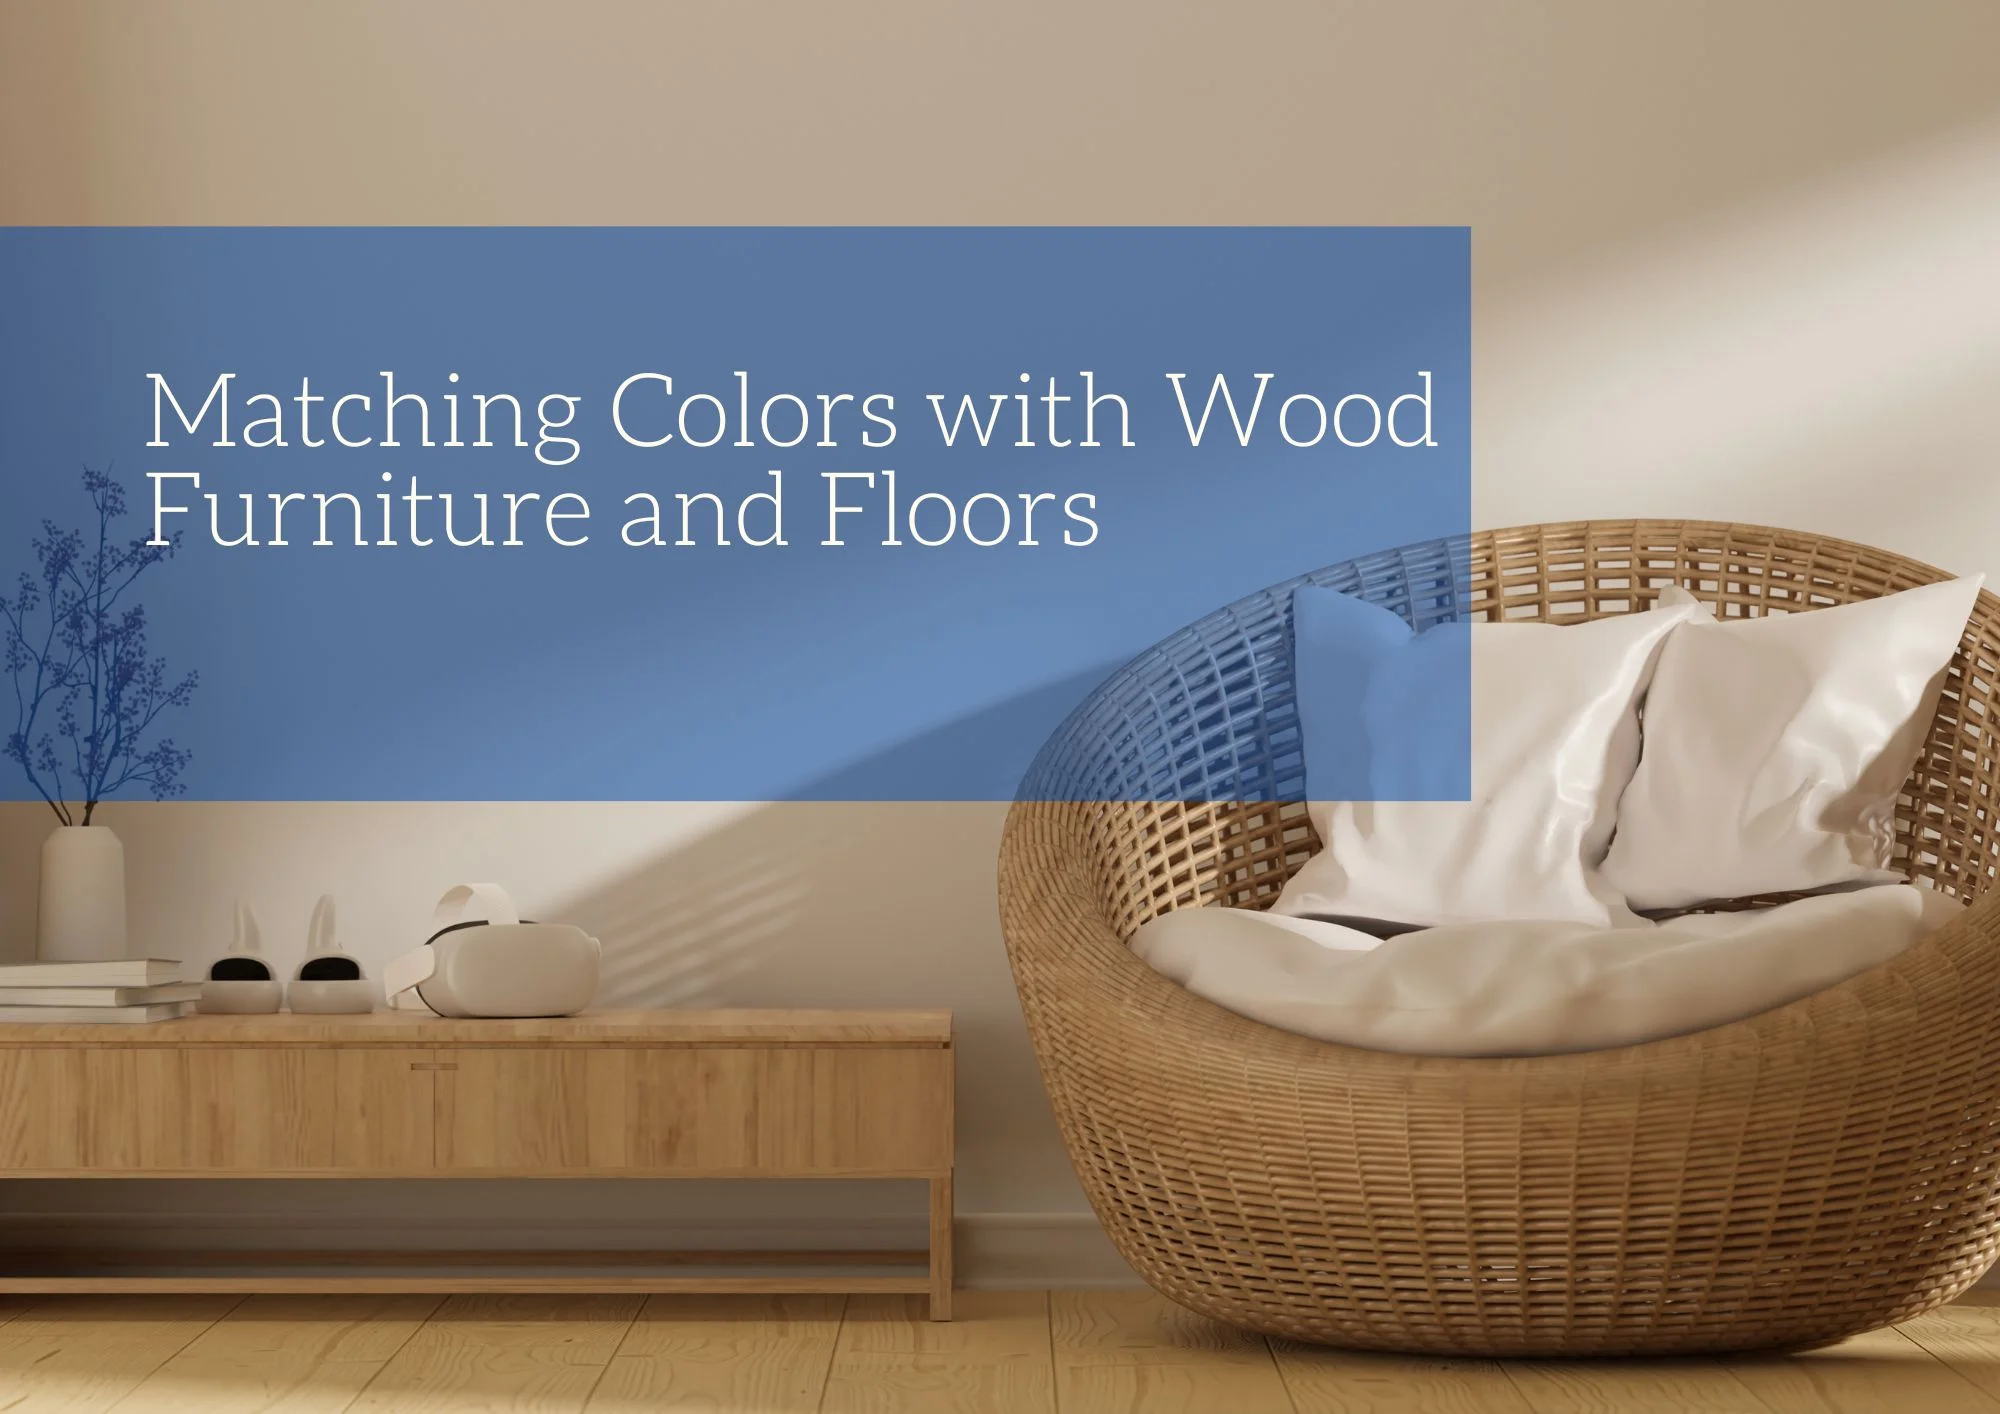 Matching Colors with Wood Furniture and Floors